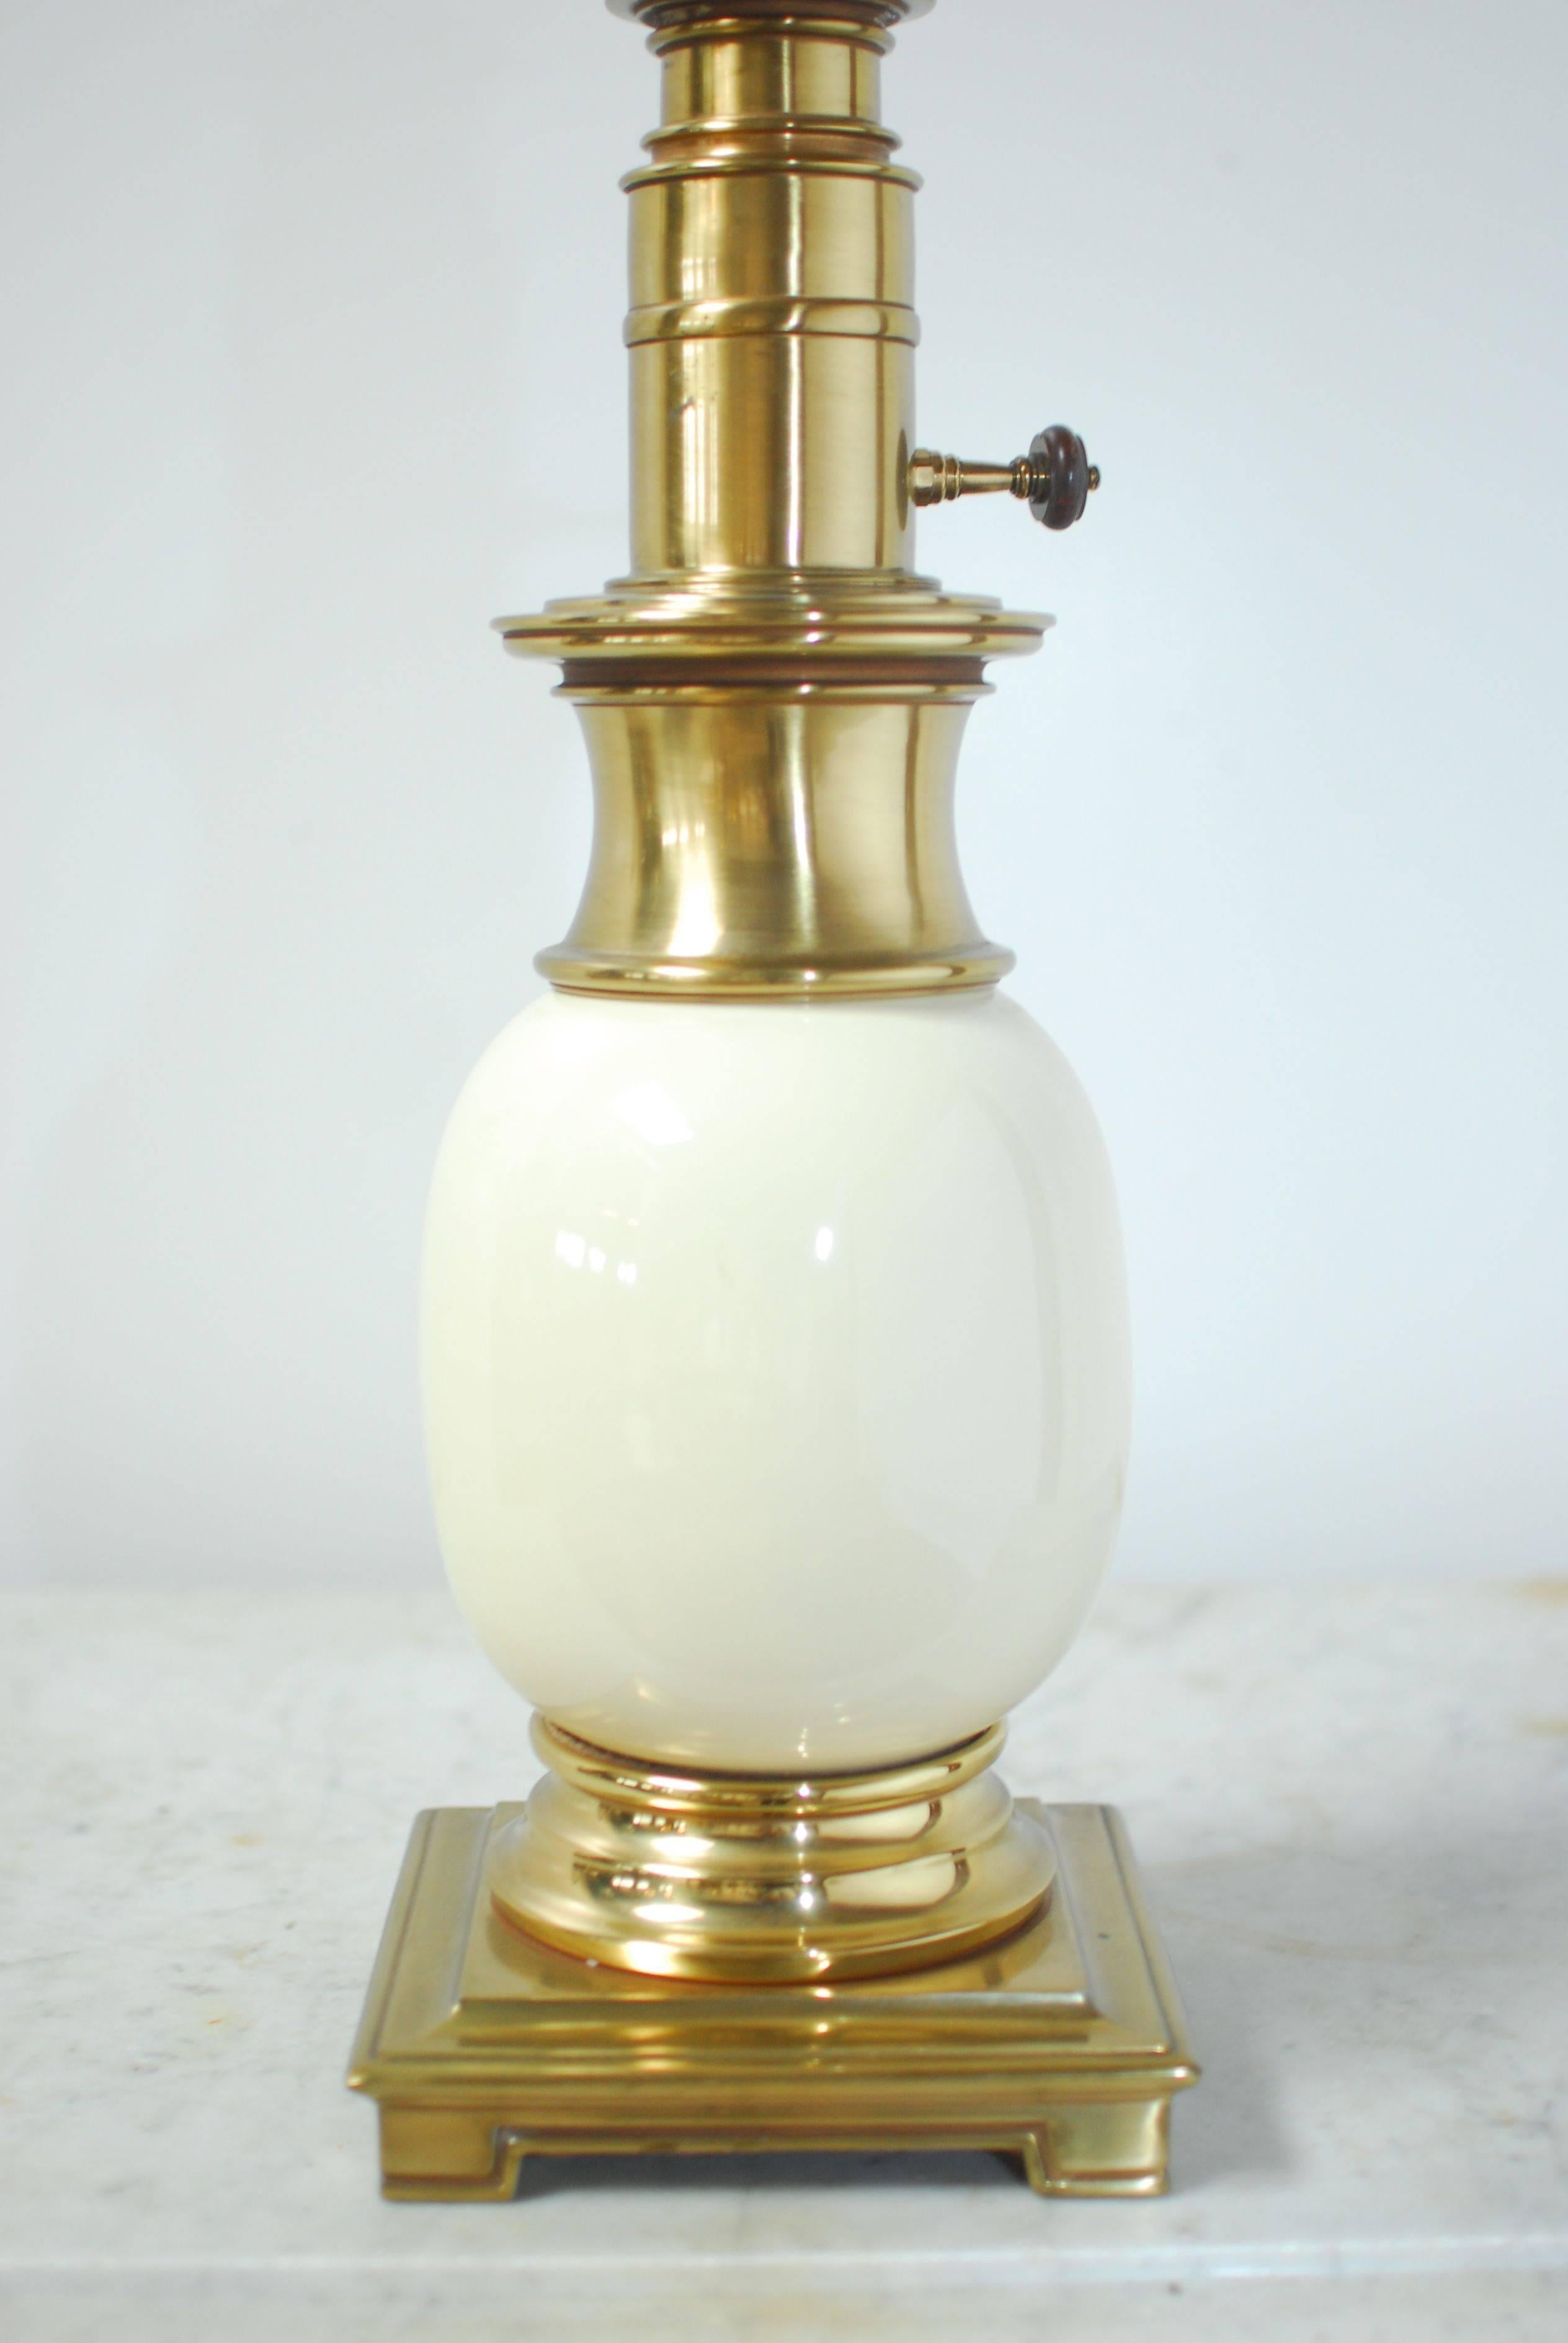 Hollywood Regency brass table lamp by Stiffel featuring a cream colored porcelain 